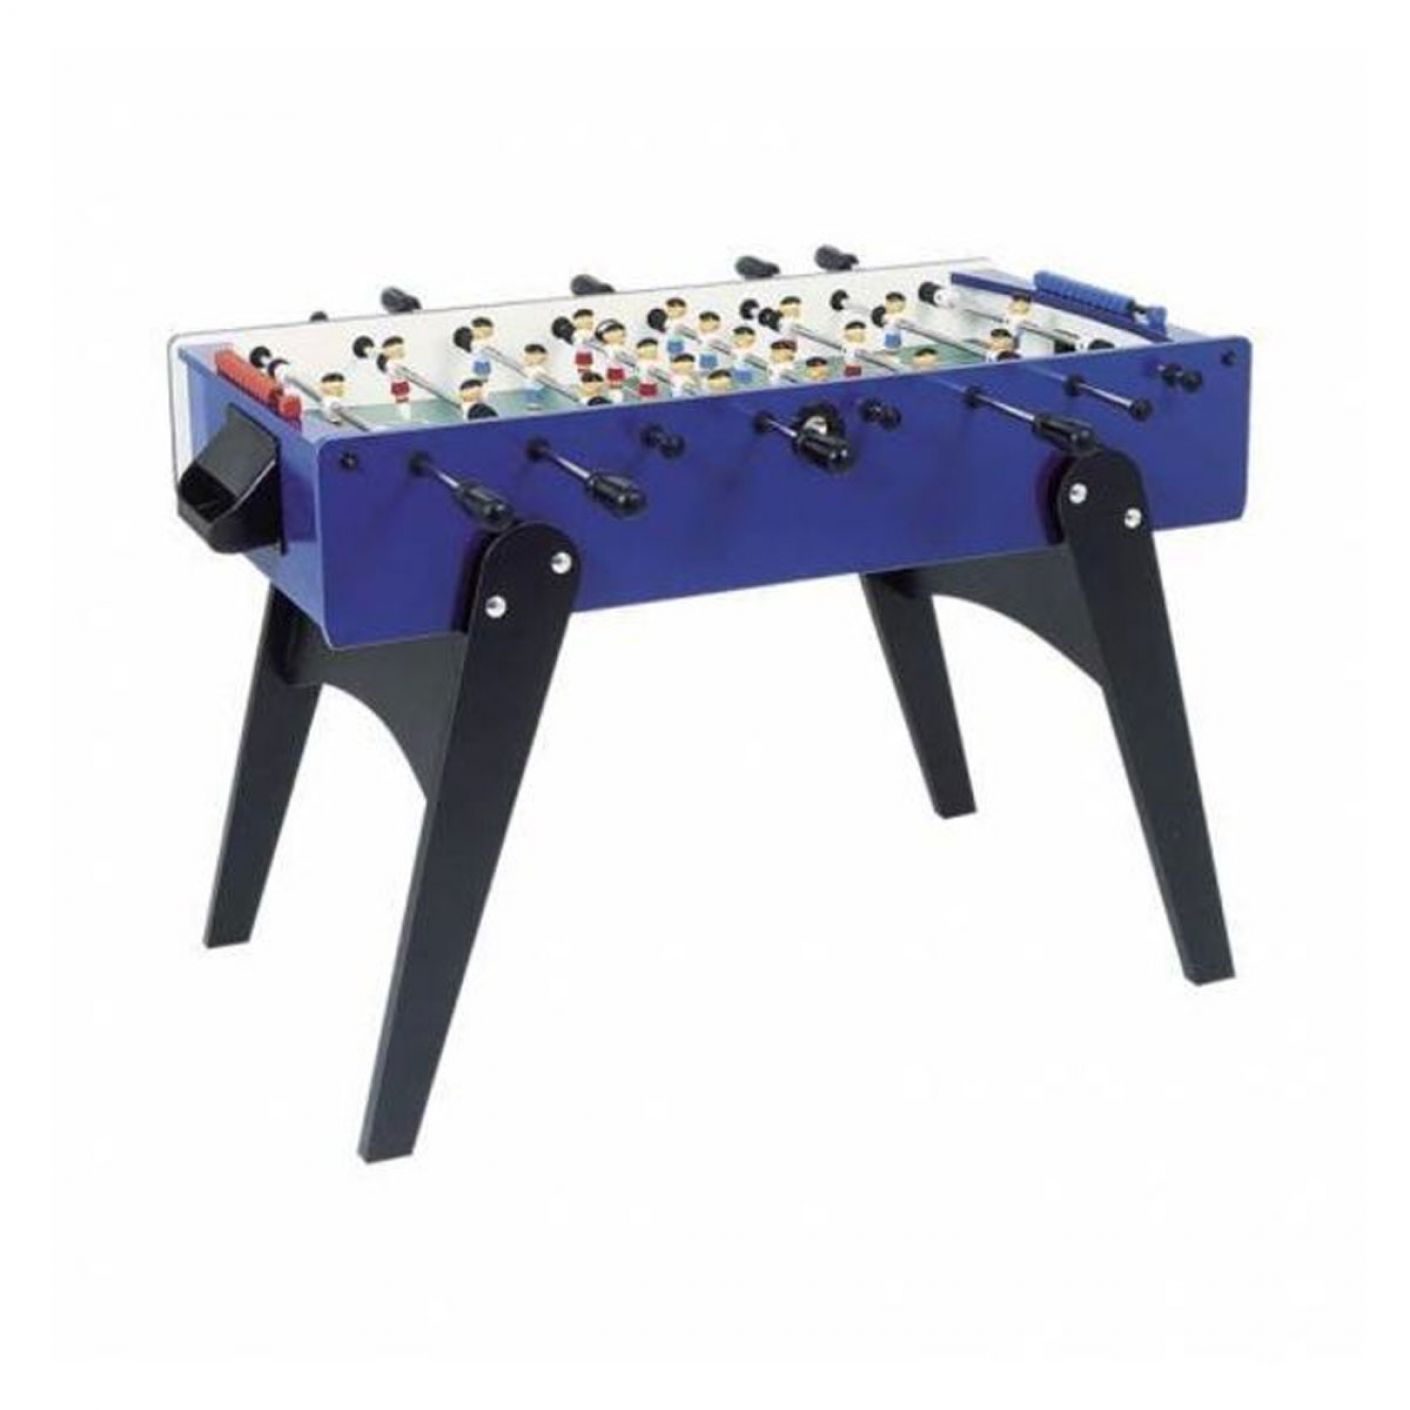 Garlando F-10 blue football table with outgoing temples